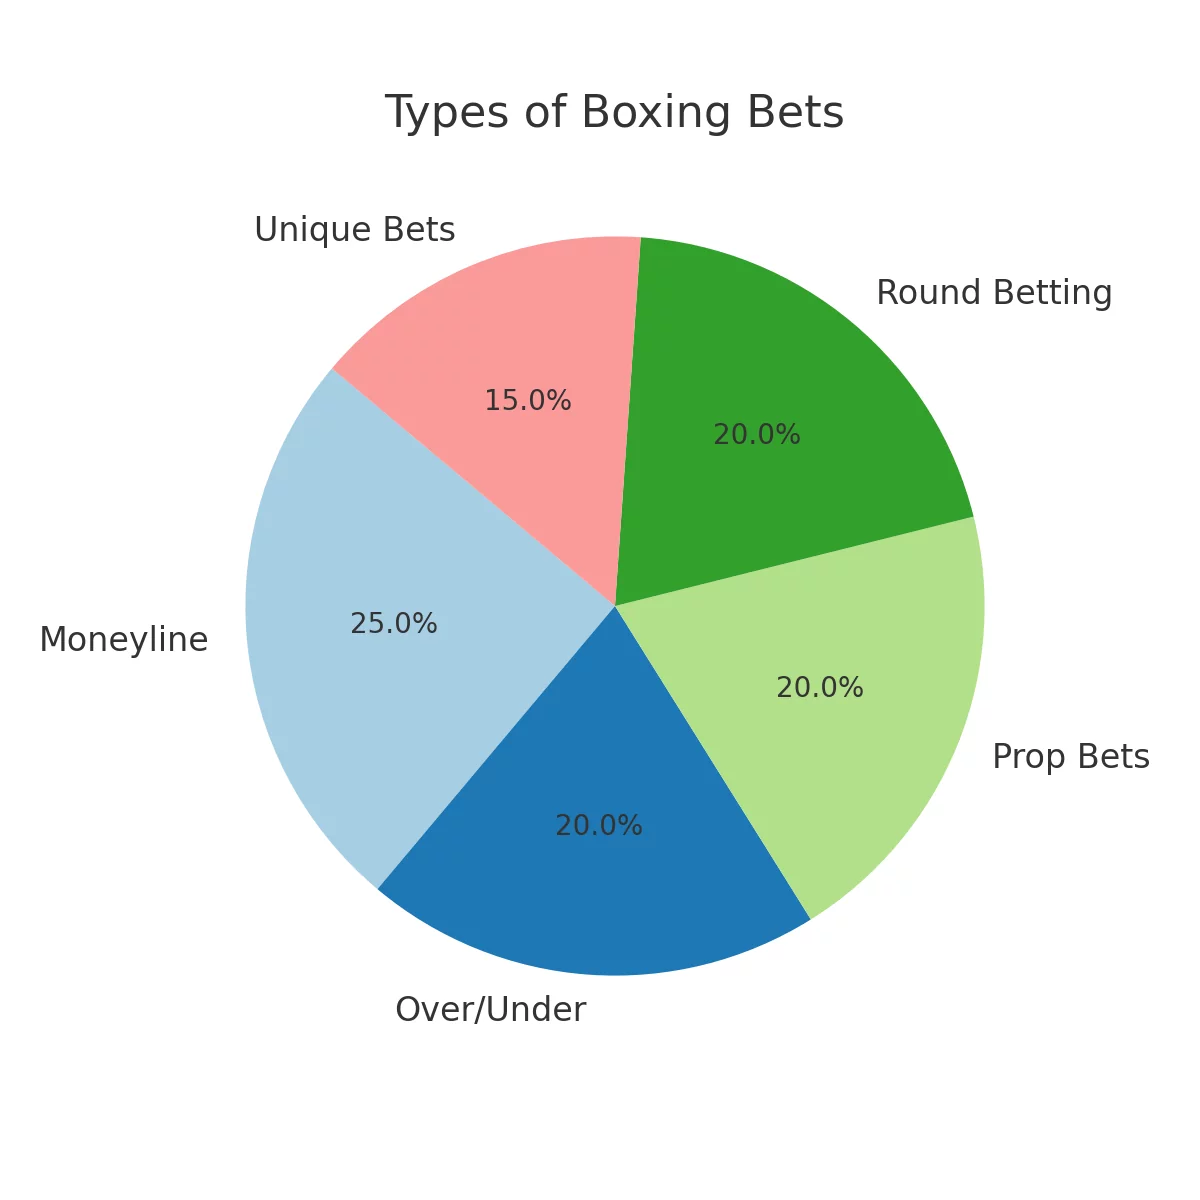 Popular boxing bets